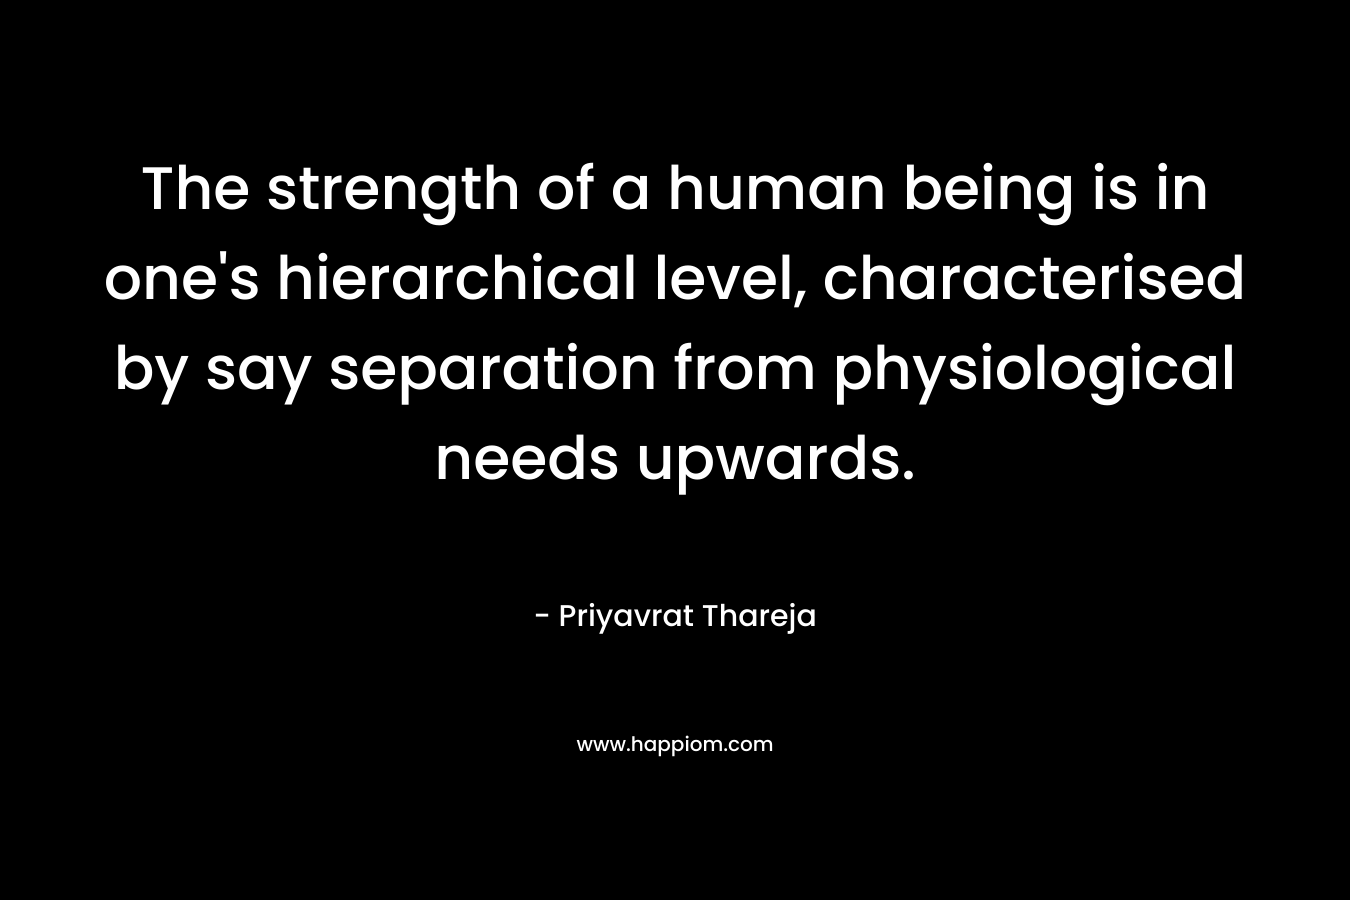 The strength of a human being is in one’s hierarchical level, characterised by say separation from physiological needs upwards. – Priyavrat Thareja